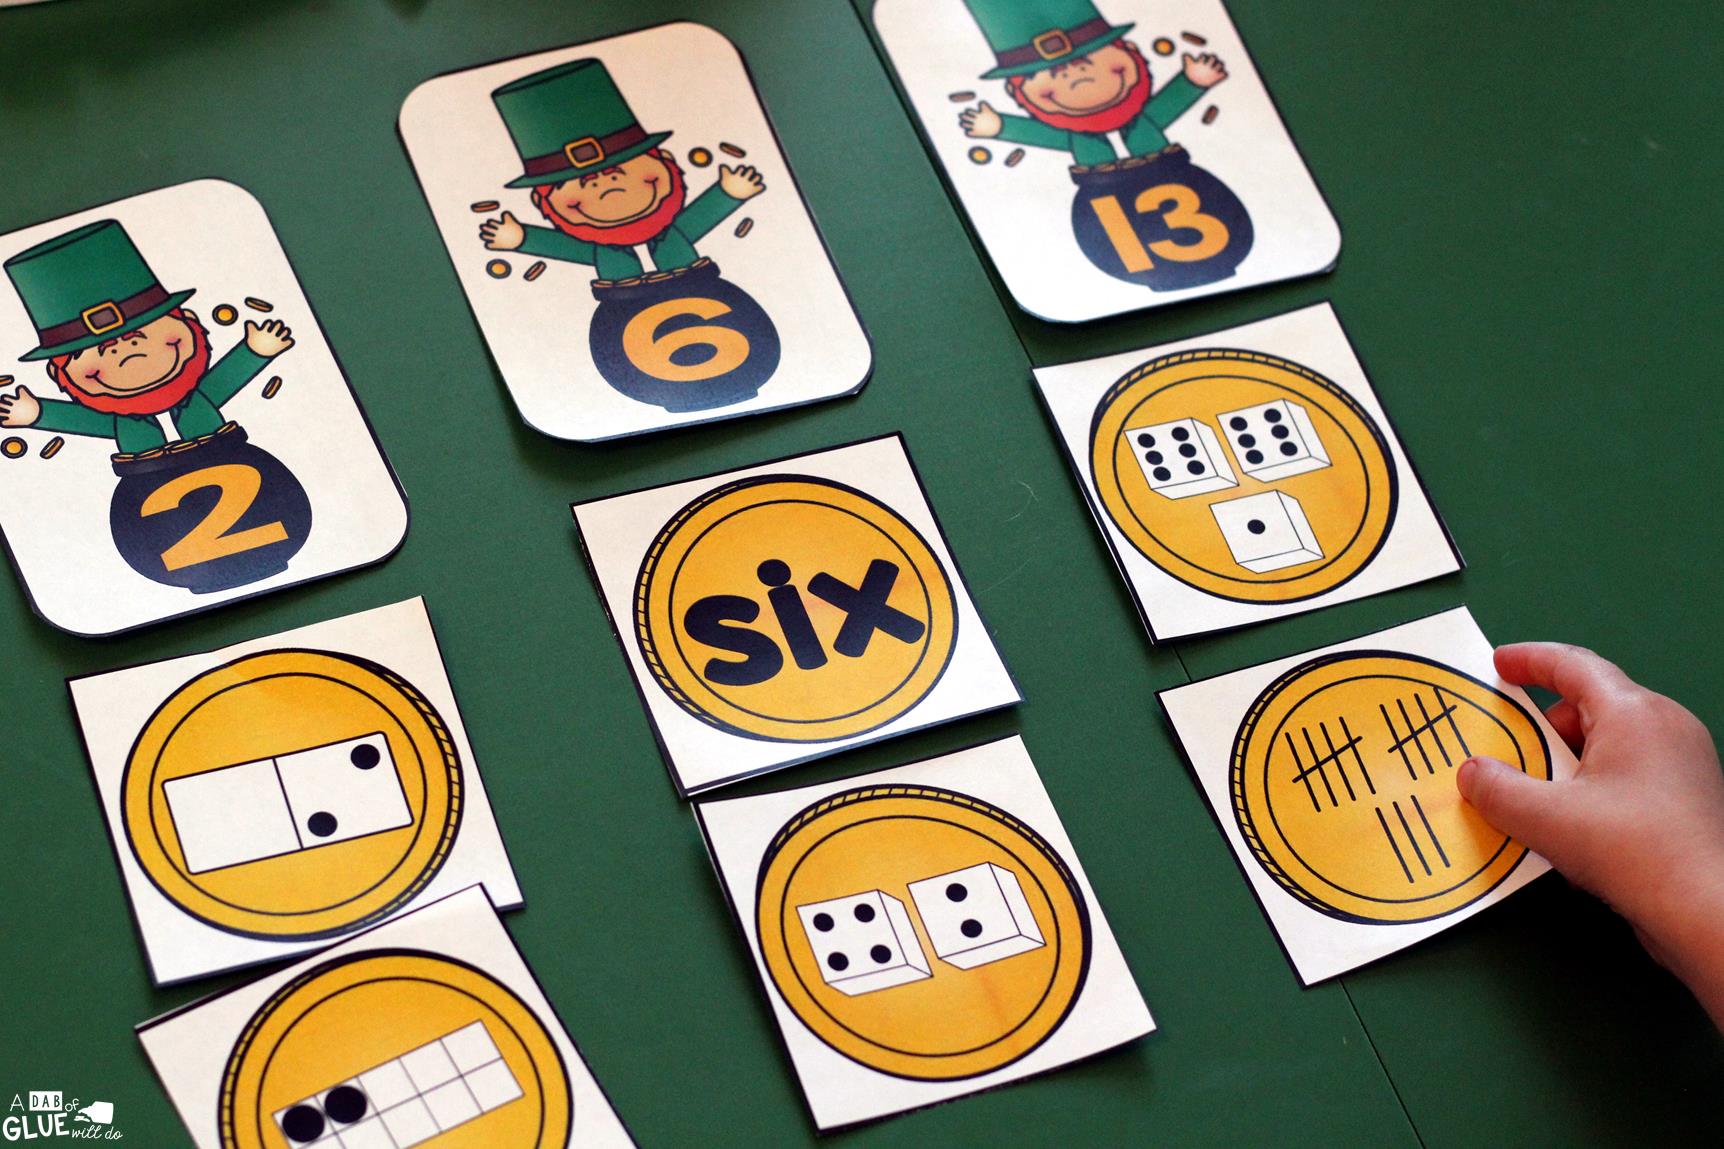 Make learning fun with these themed Initial Sound and Number Match-Ups. Your elementary age students will love this fun St. Patrick's Day themed literacy center and math center! Perfect for literacy stations, math stations, or small review groups. Use in your Preschool, Kindergarten, and First Grade classrooms. Black and white options available to save your color ink.